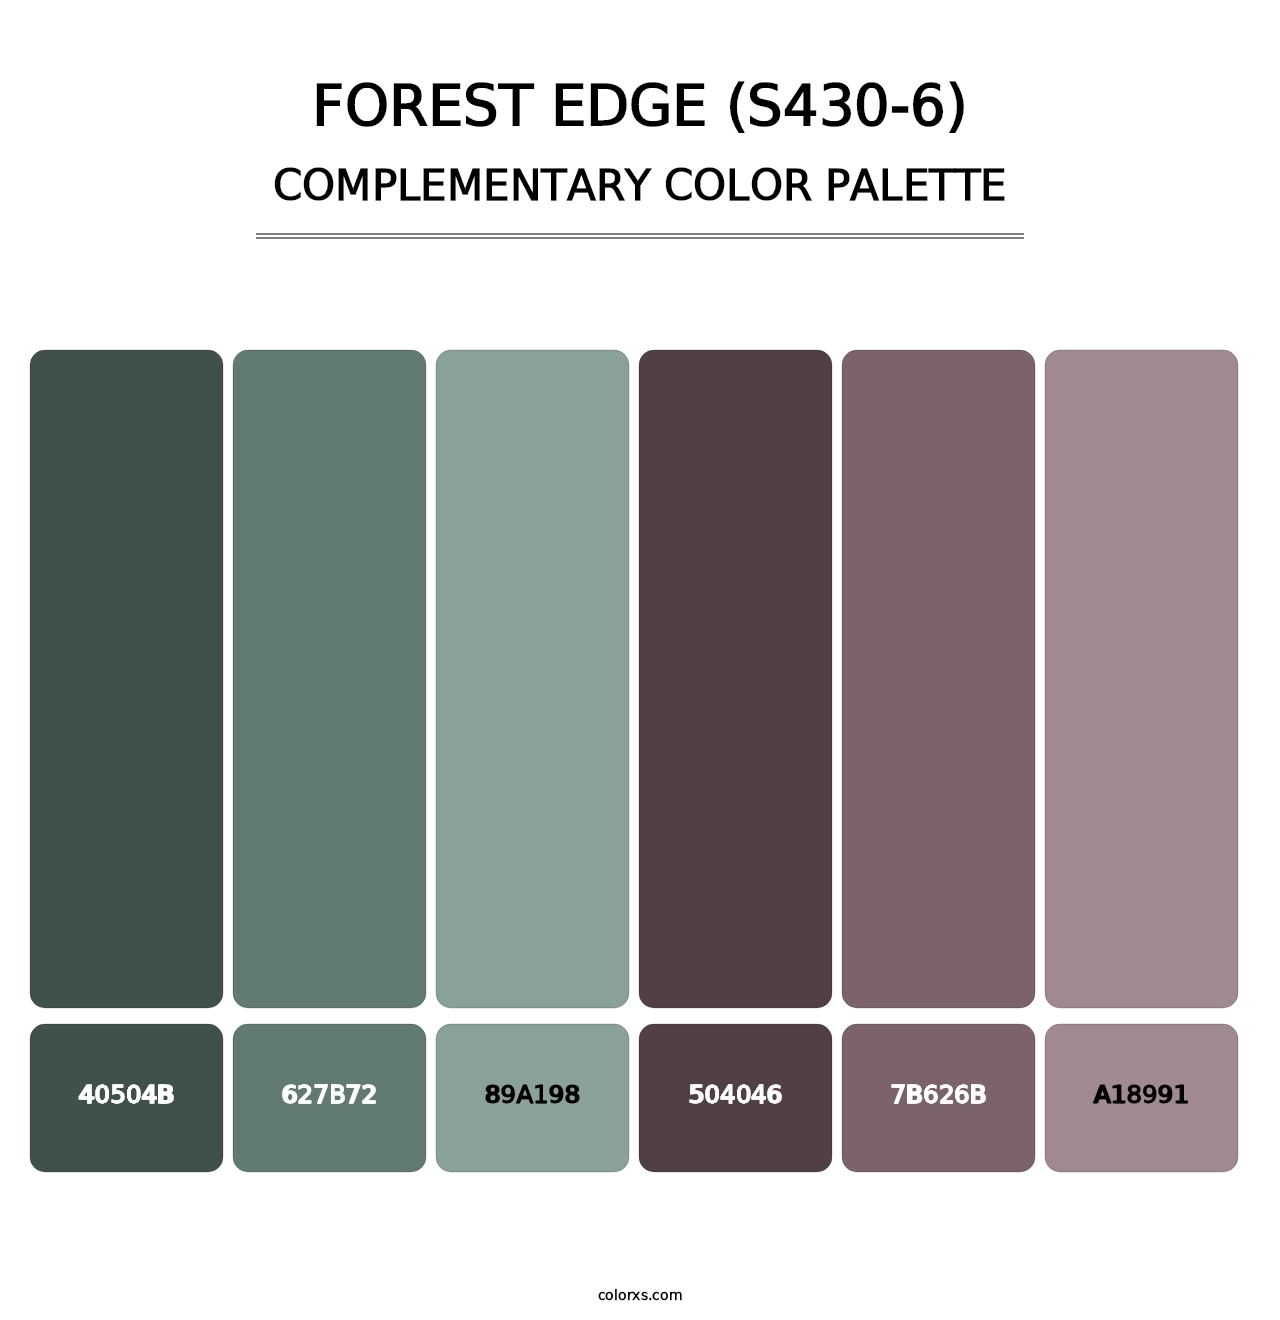 Forest Edge (S430-6) - Complementary Color Palette